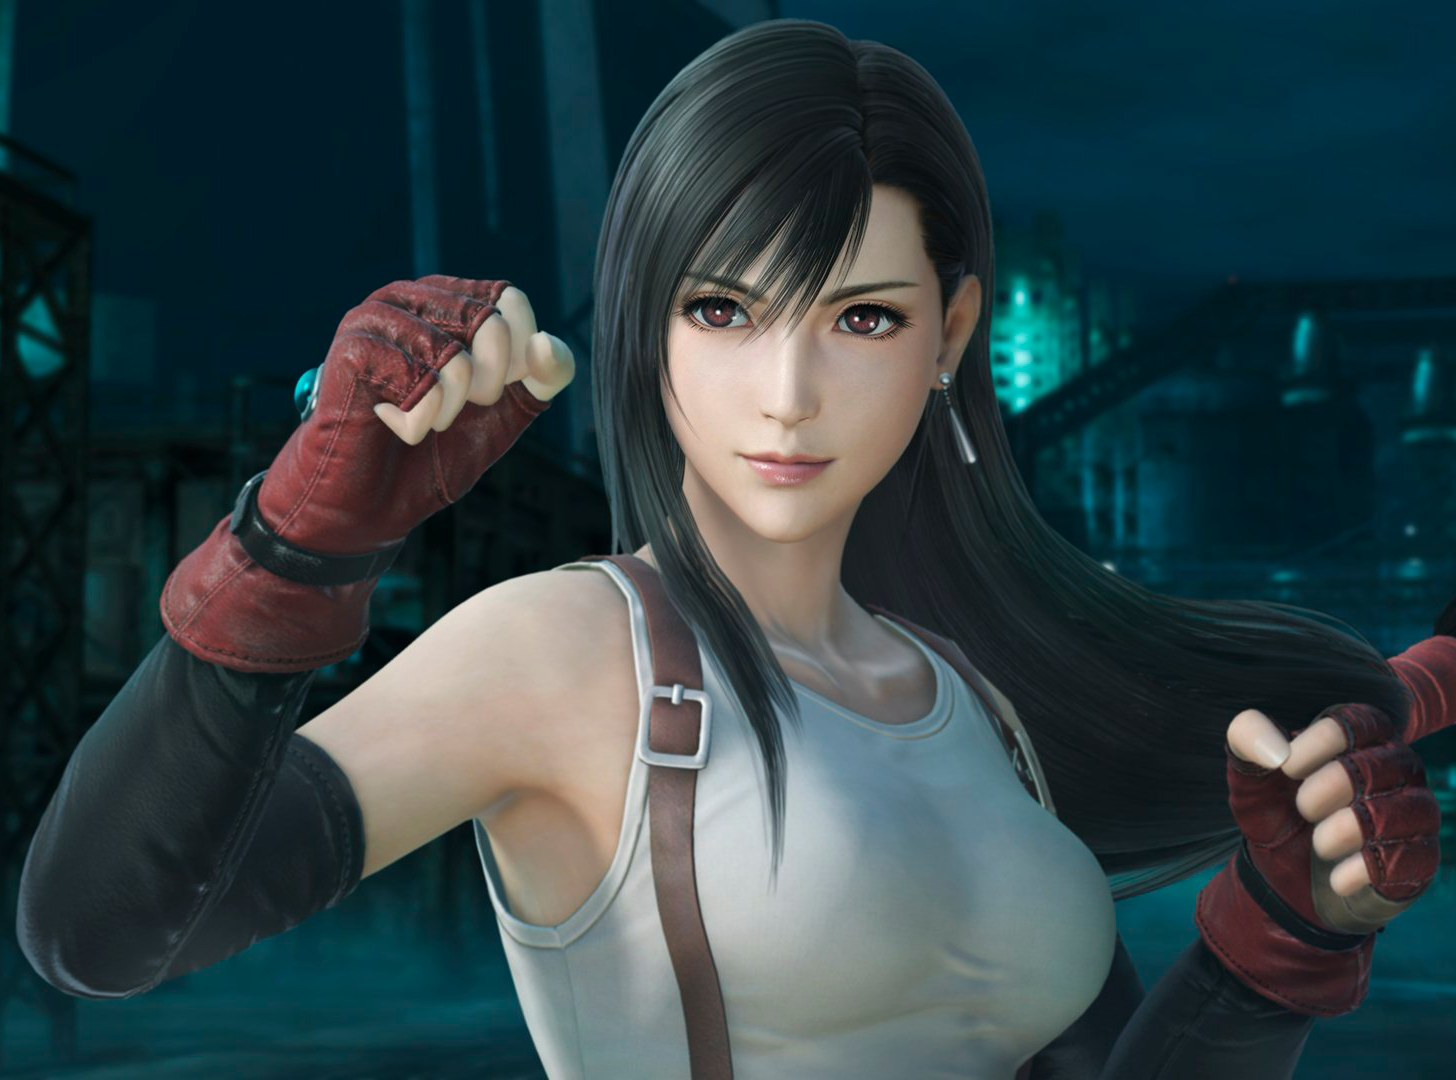 Tifa Lockhart's classic outfit by Corneo - 2.0.0 | Stable Diffusion  Embedding | Civitai